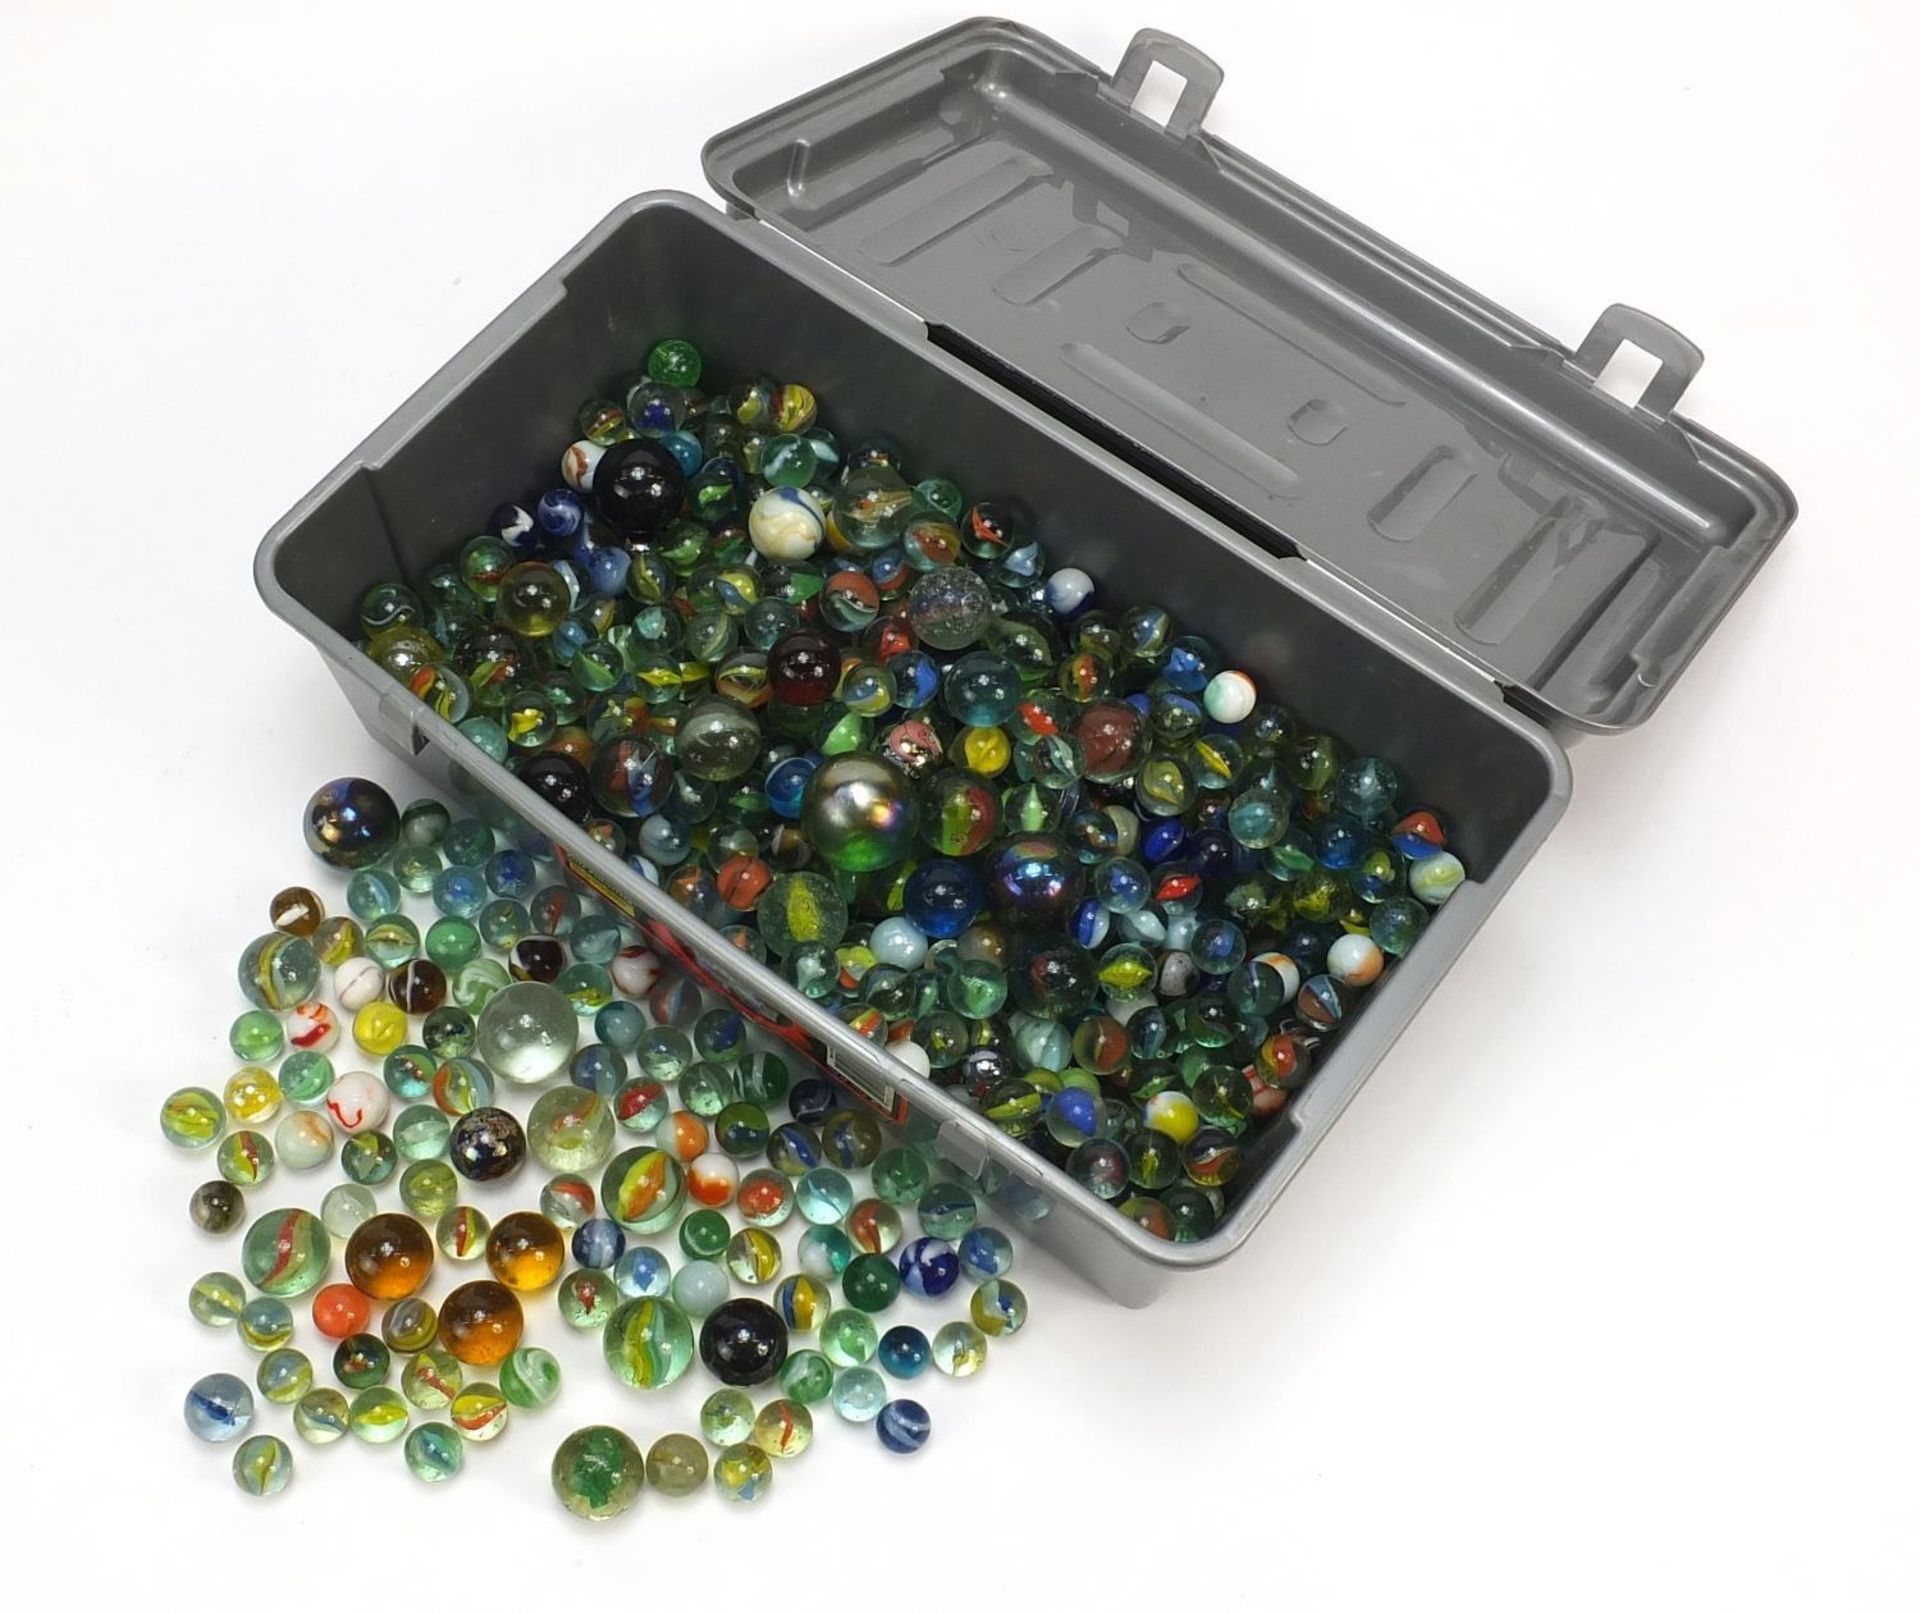 Collection of glass marbles